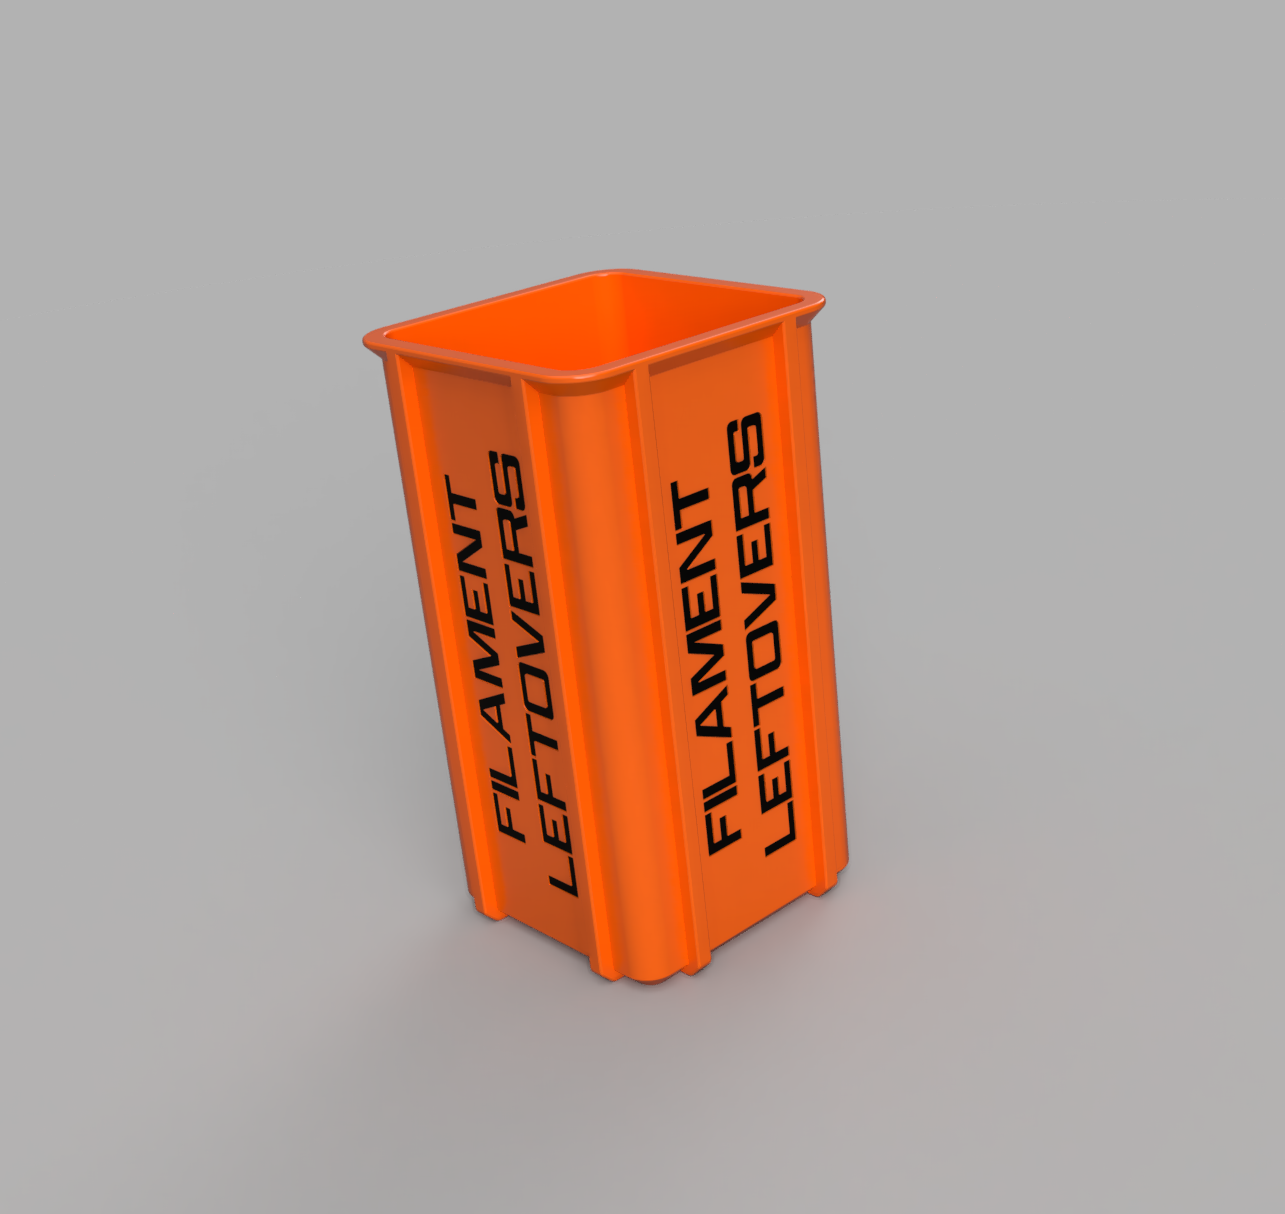 Filament leftovers trash / recycle bin (approx. 100x100x200mm)